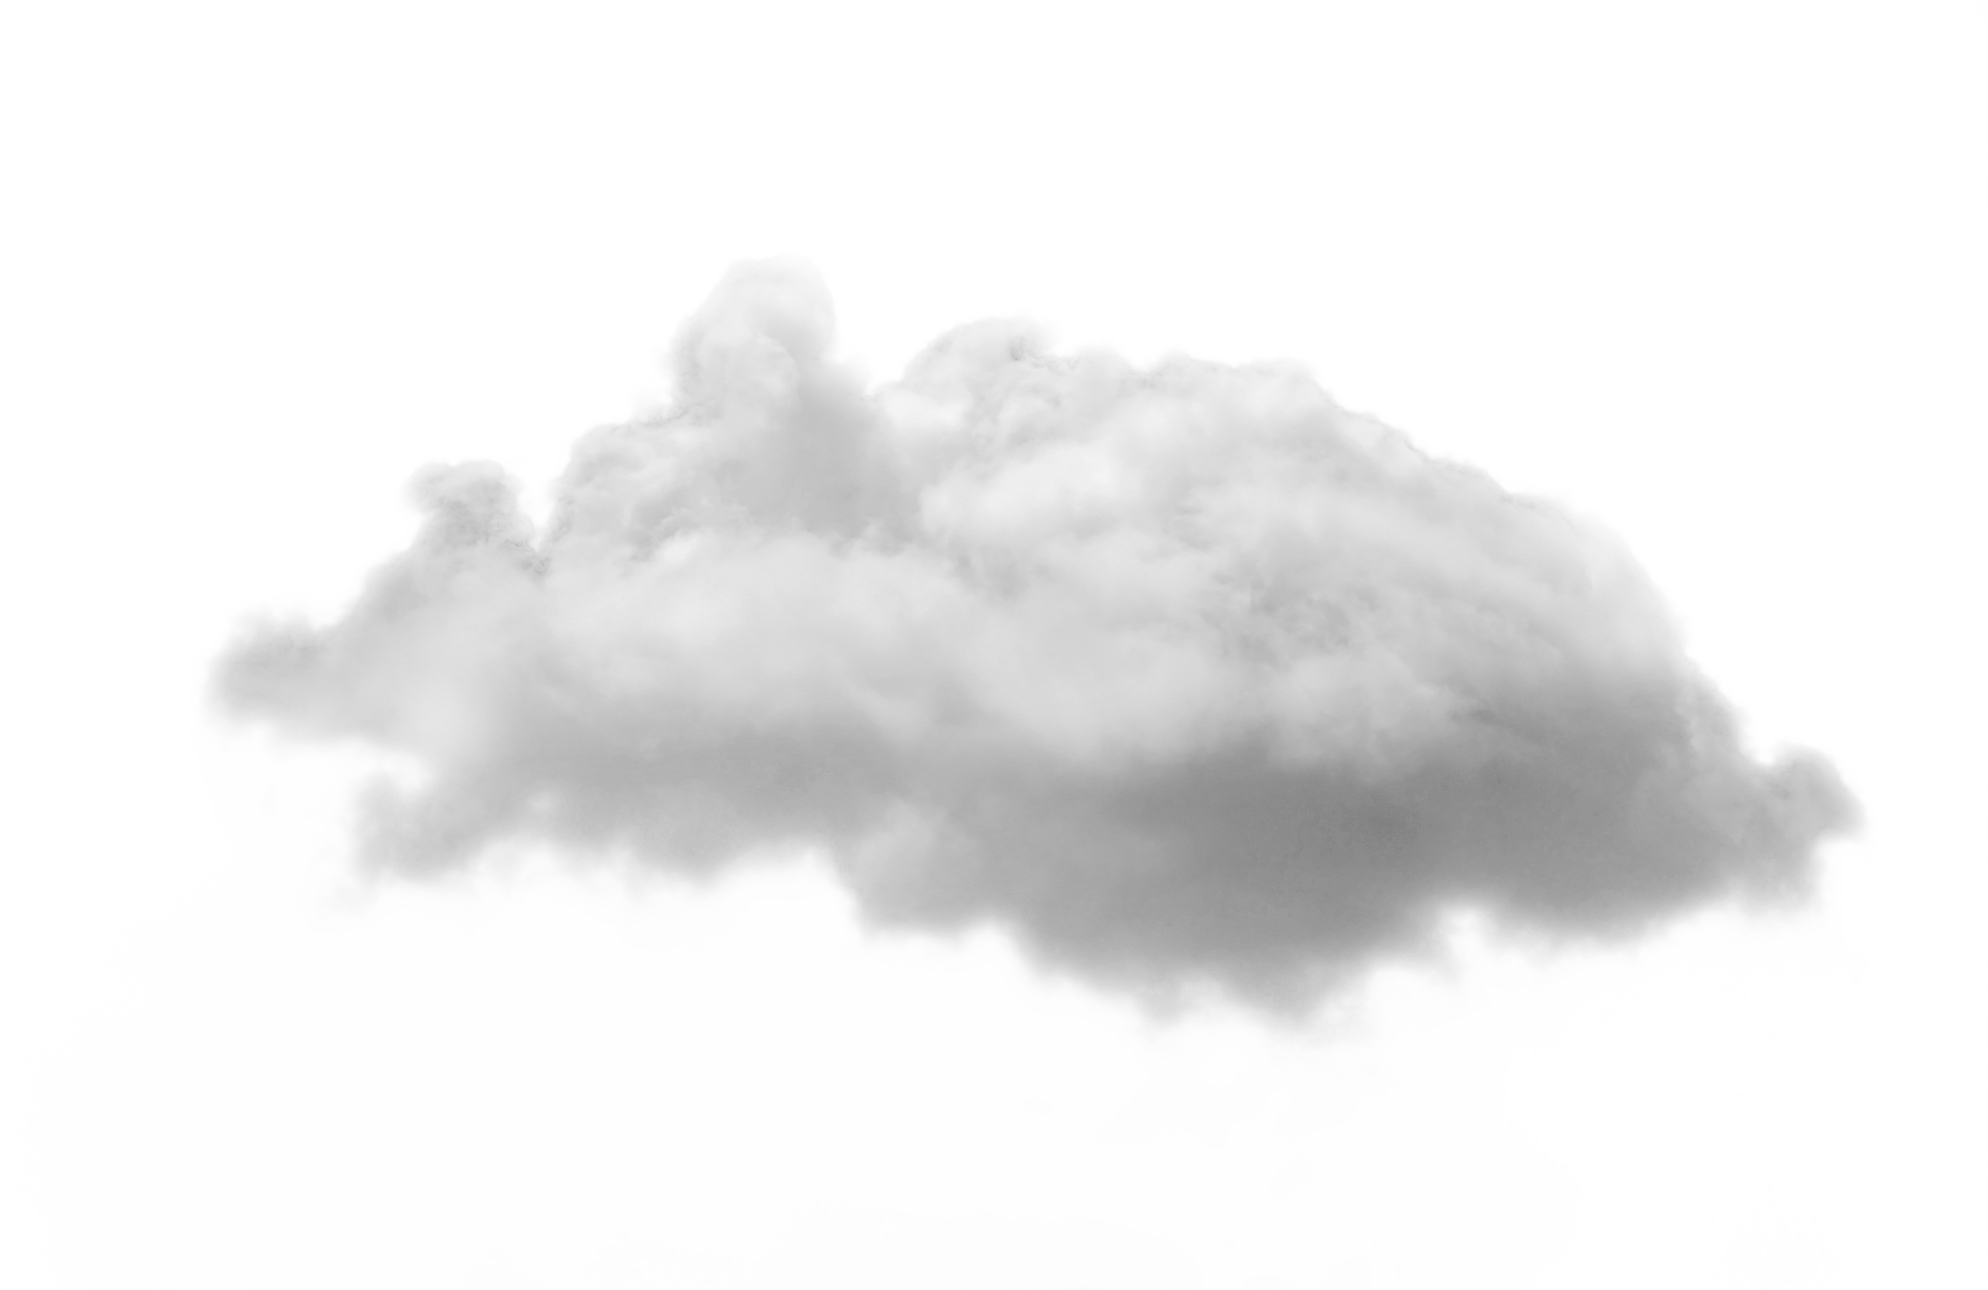 Image From Http://www.rabiahsamiullah Pluspng.com/virtual_Clouds_Project_C/cloud. - Gewitterwolken, Transparent background PNG HD thumbnail